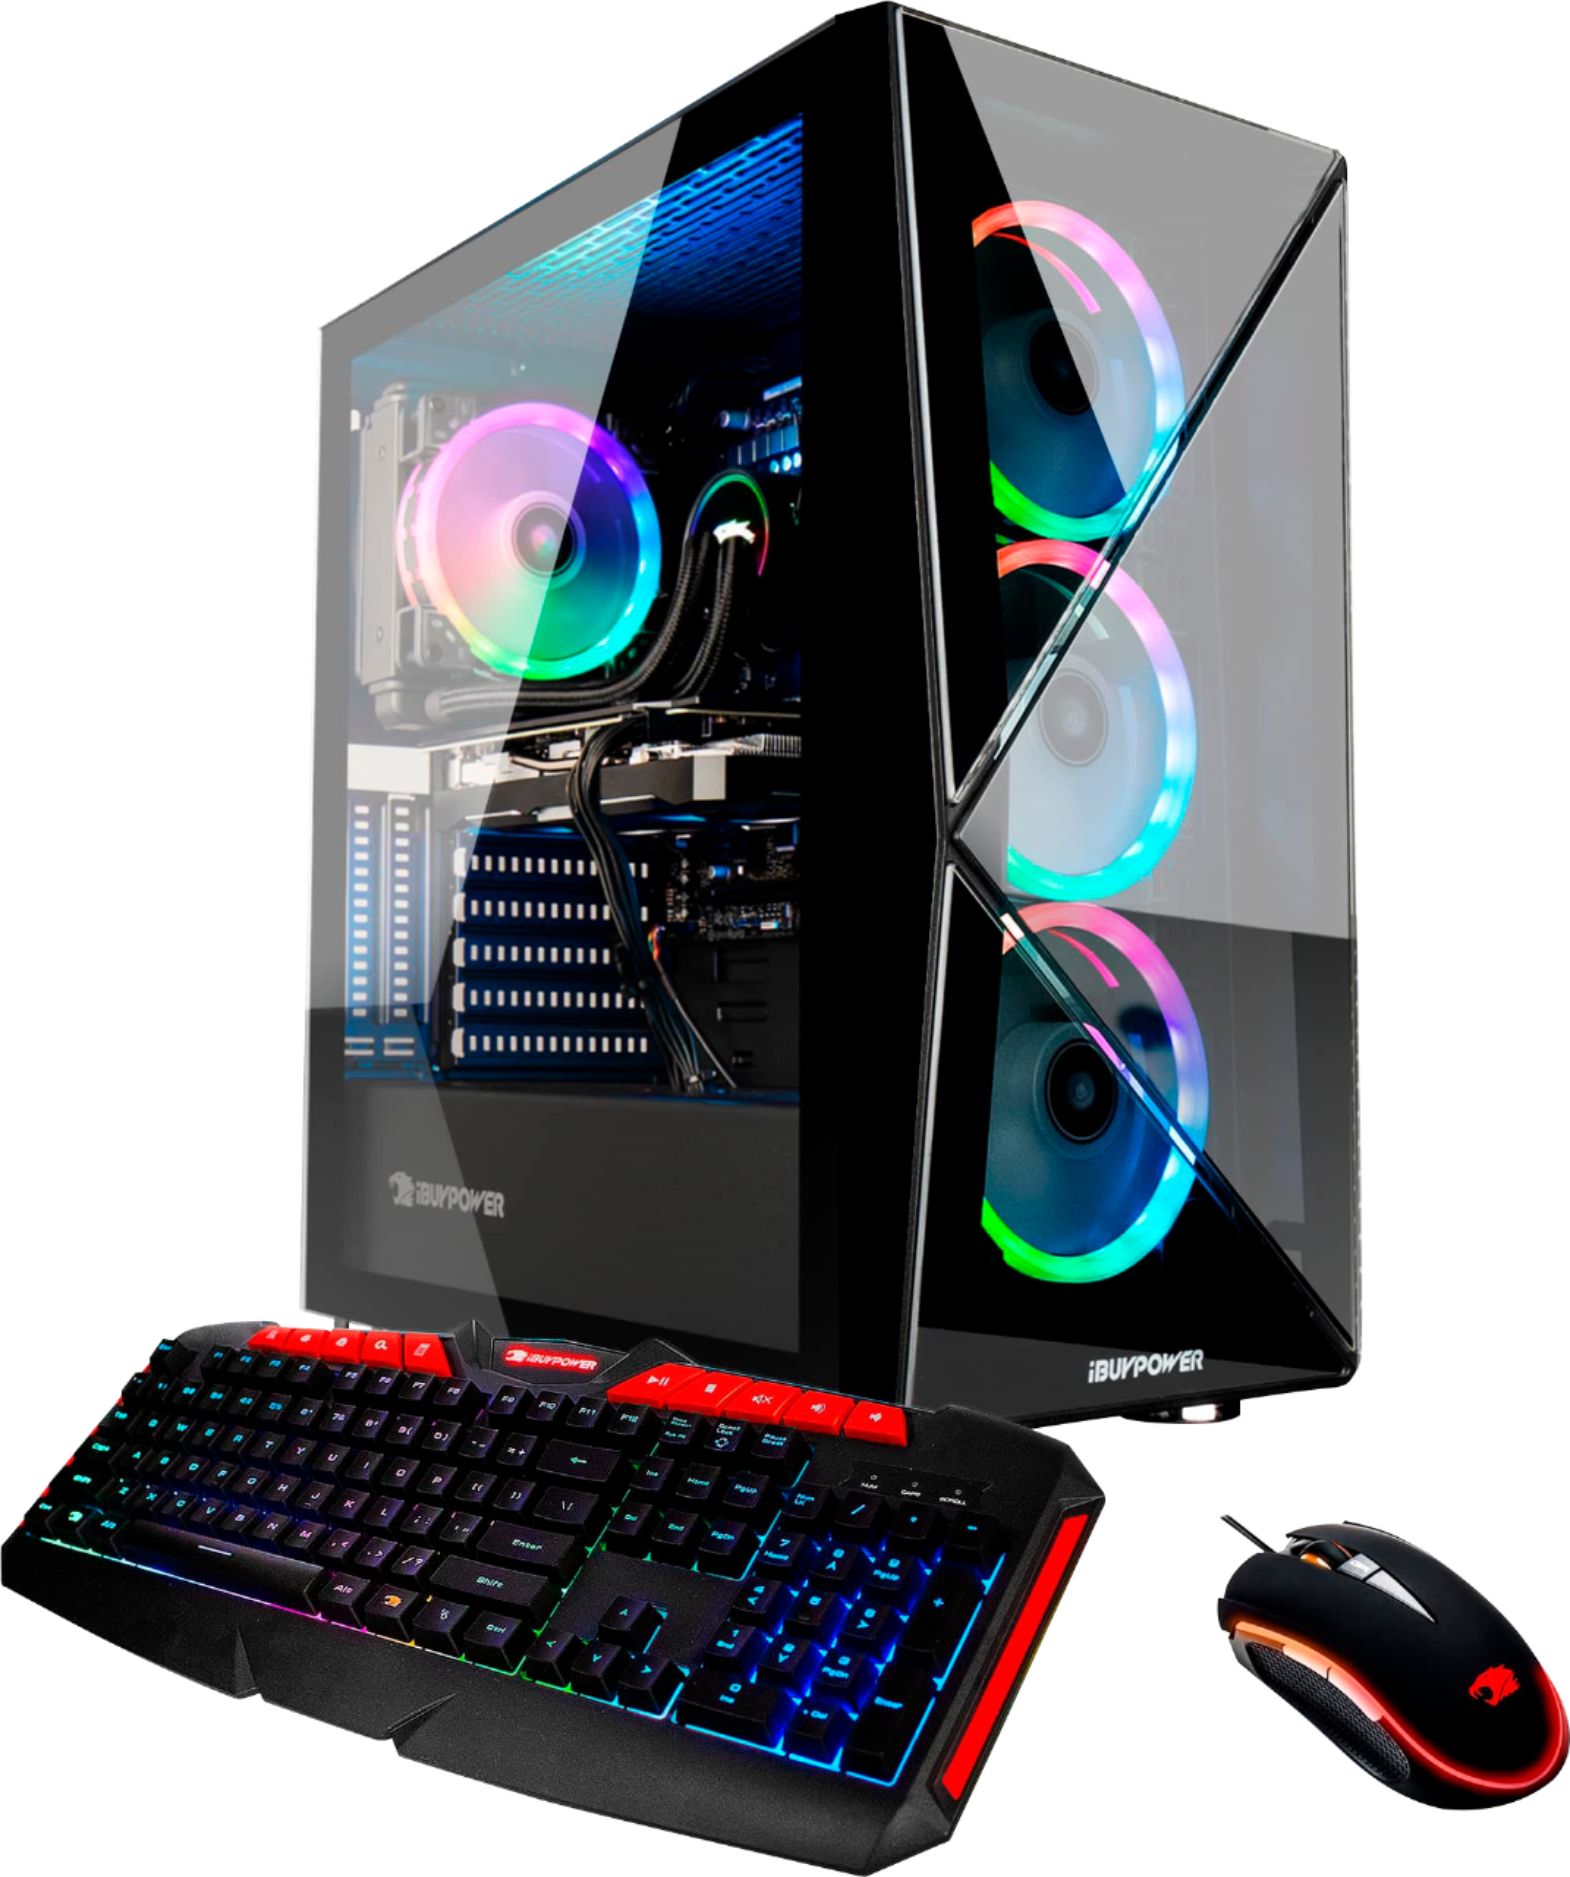 DIY Is Ibuypower Gaming Pc Good for Small Room